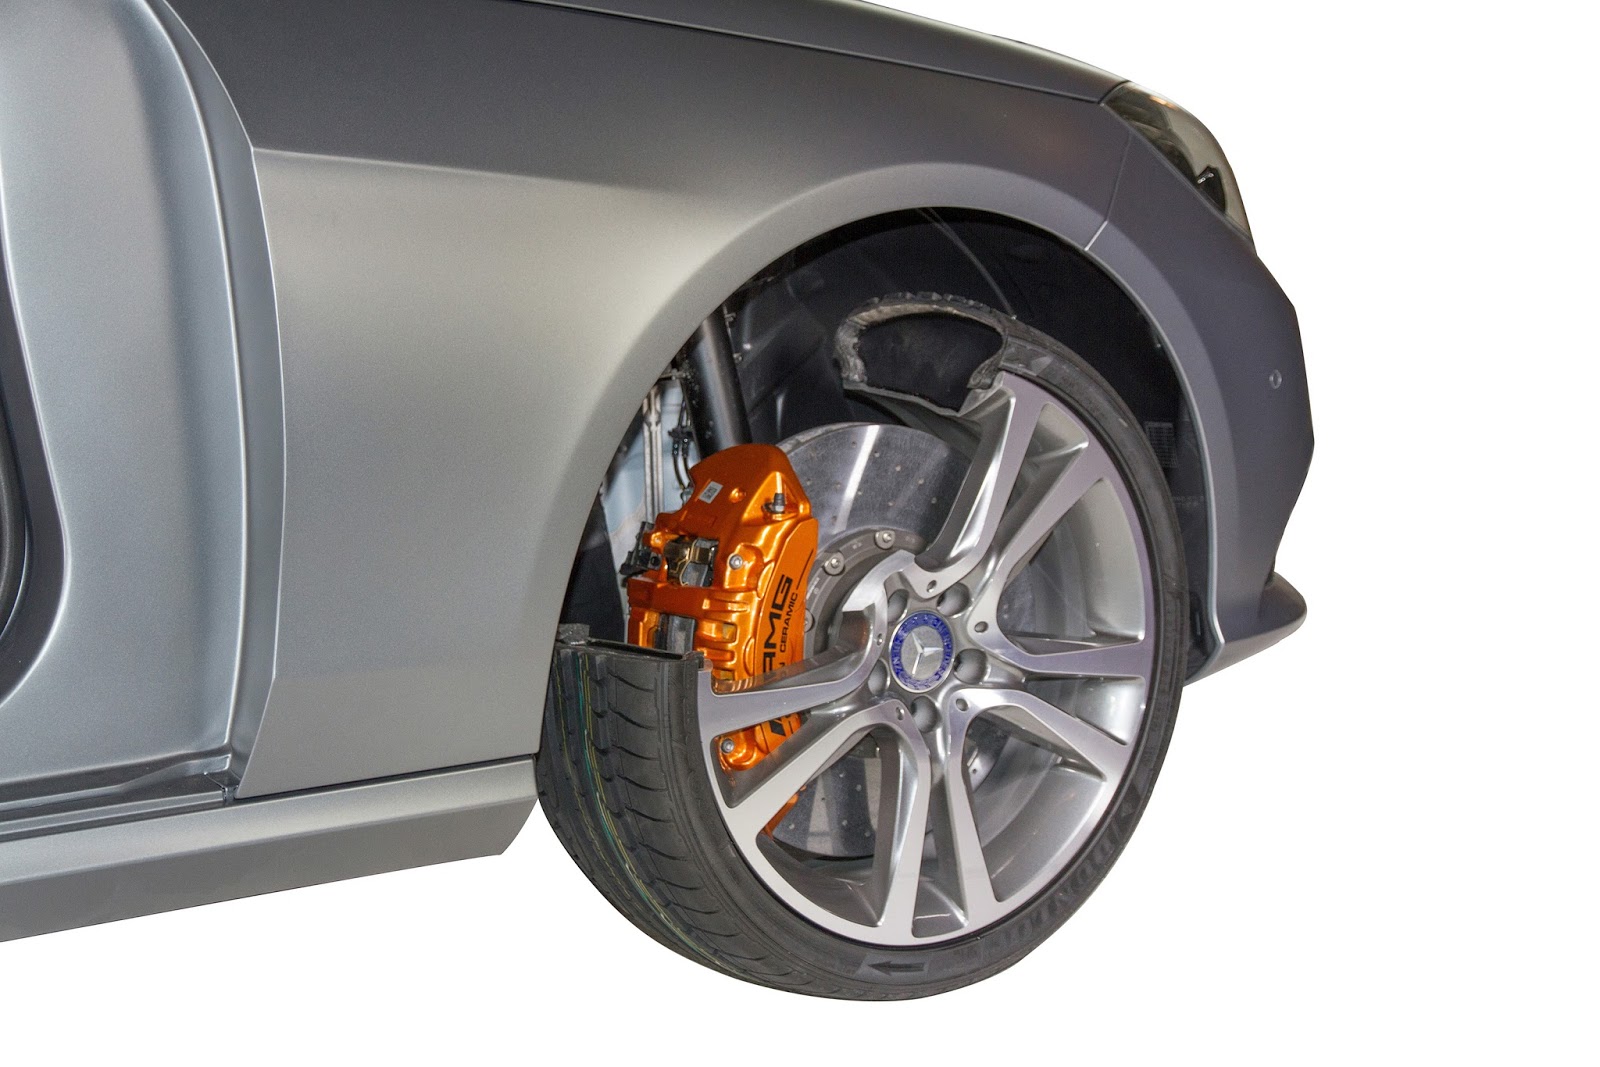 How The Car Brake Works - Universal Science Compendium